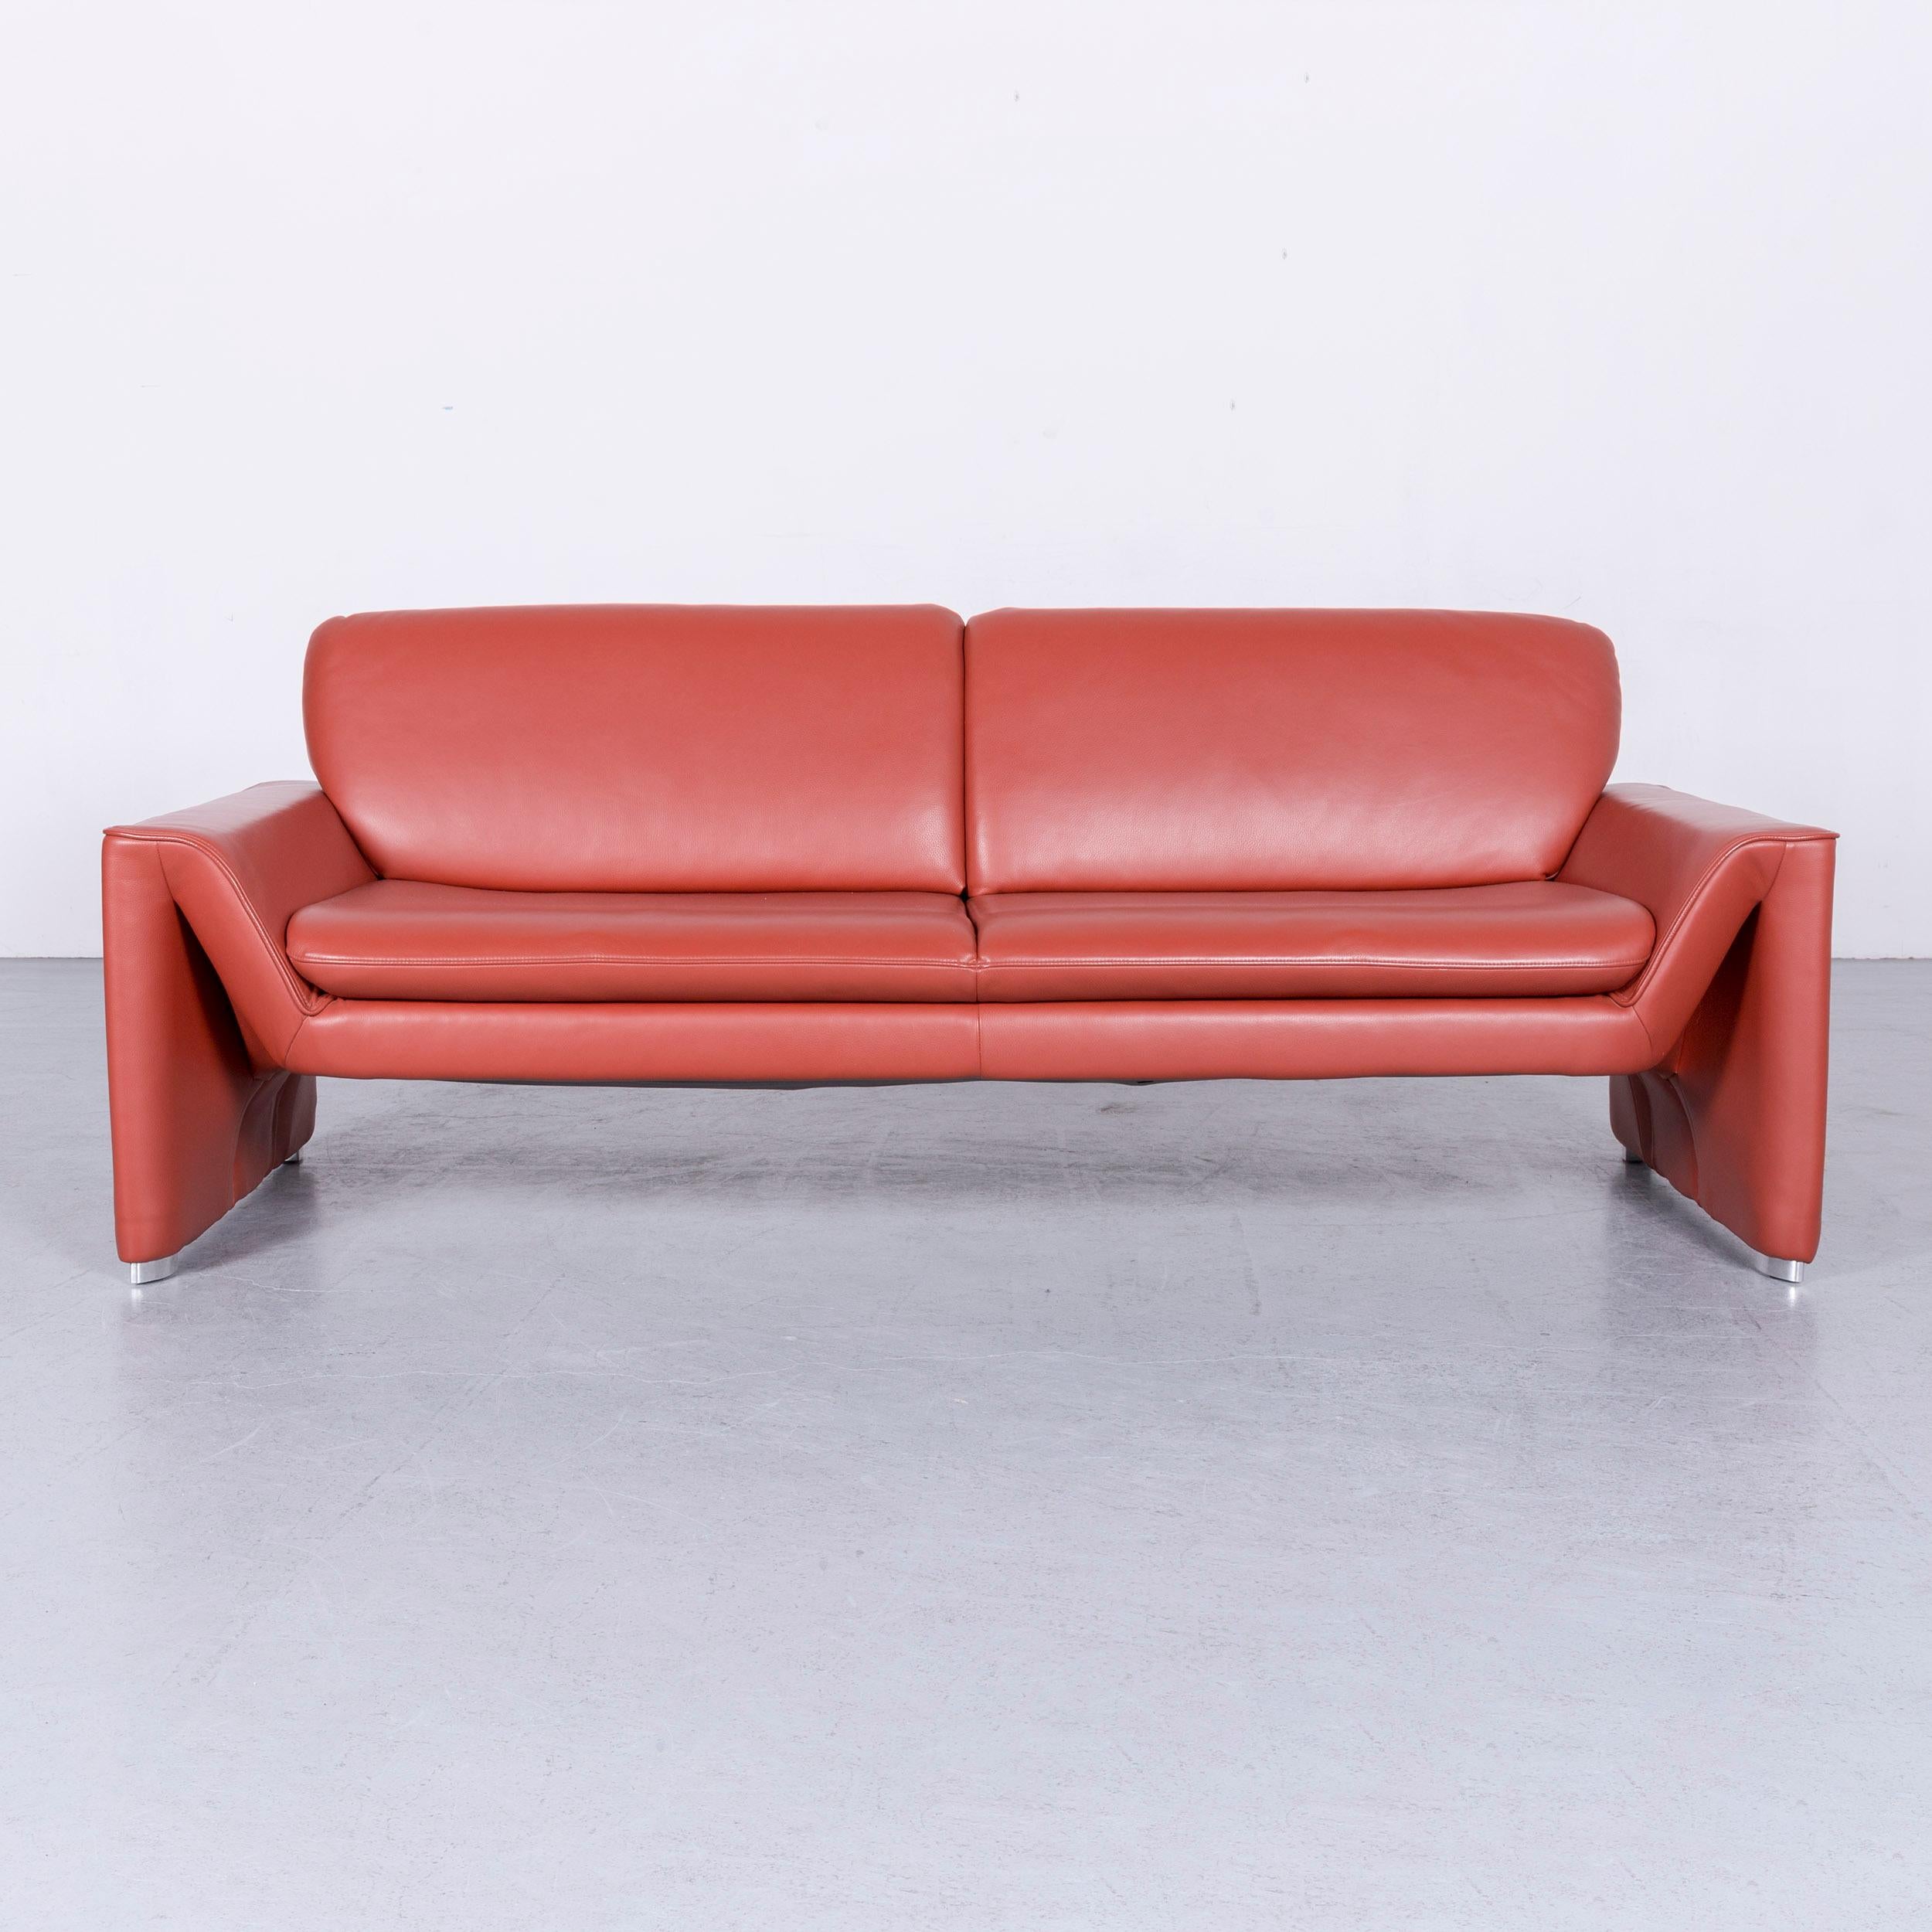 We bring to you a Laauser Corvus designer sofa corner-sofa footstool set leather red couch.